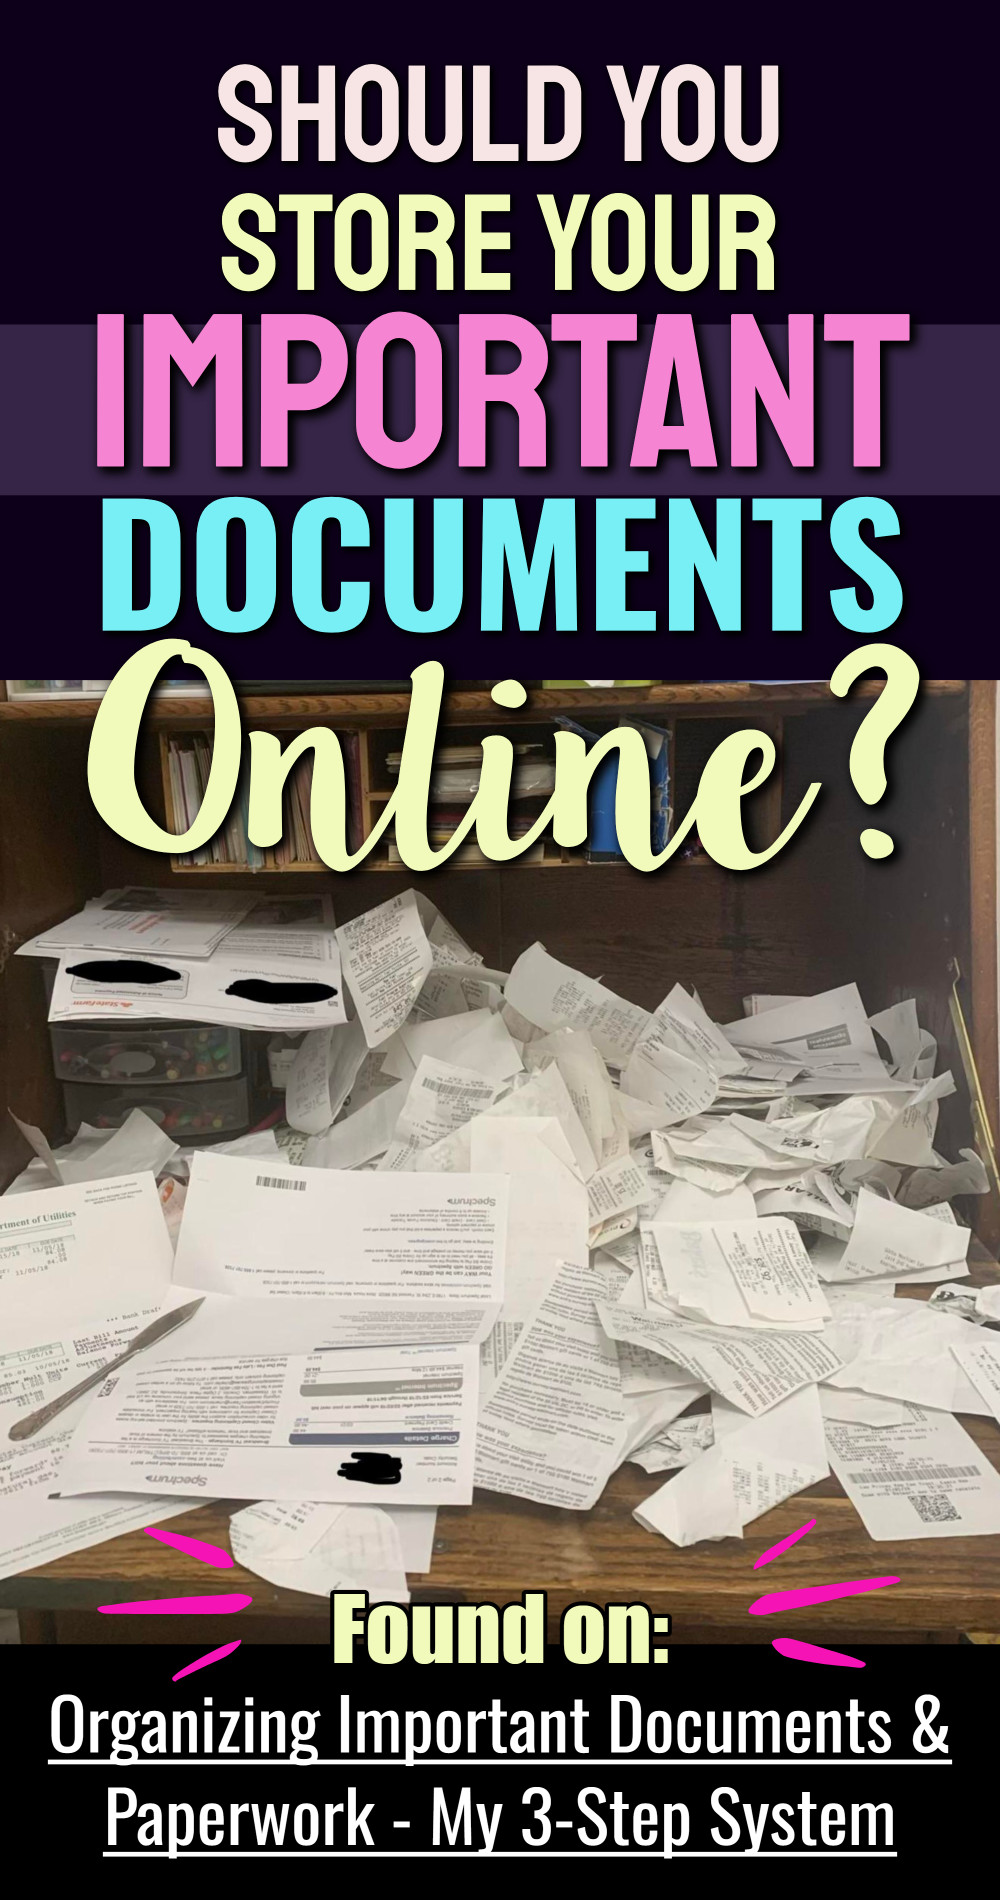 should you store important documents online